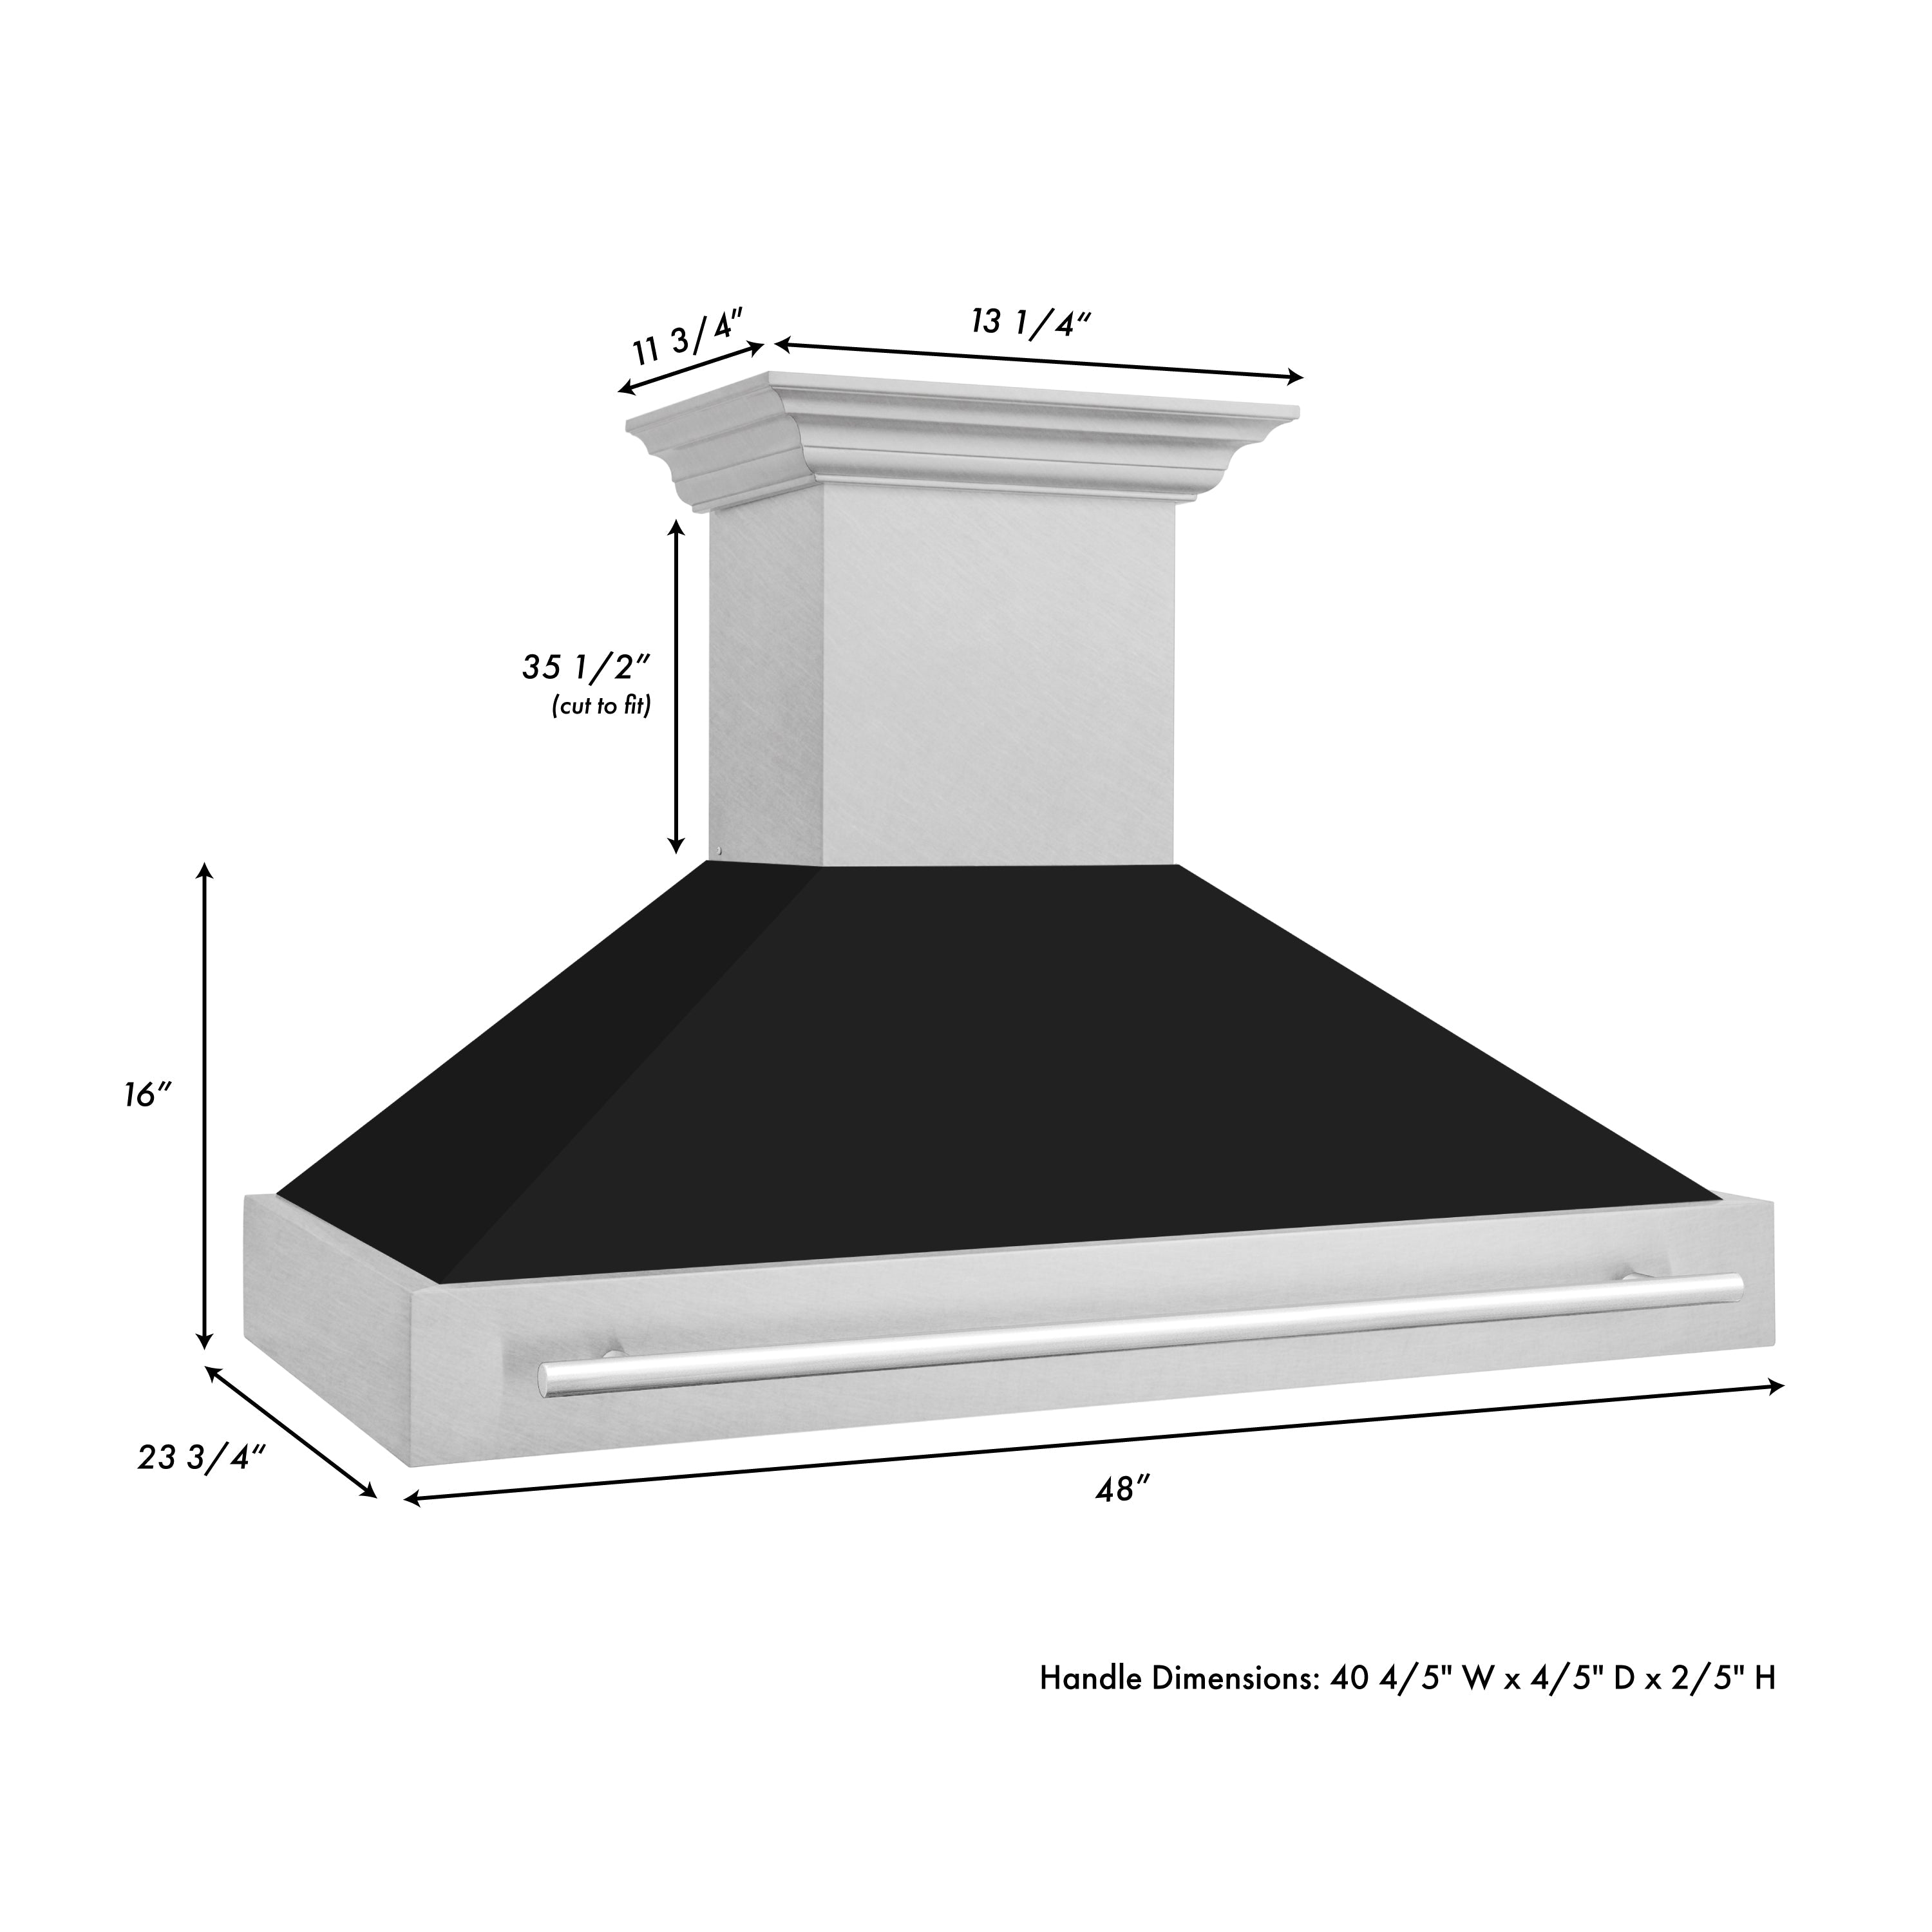 ZLINE 48 in. Fingerprint Resistant Stainless Steel Range Hood with Colored Shell Options (8654SNX-48) dimensional diagram and measurements.